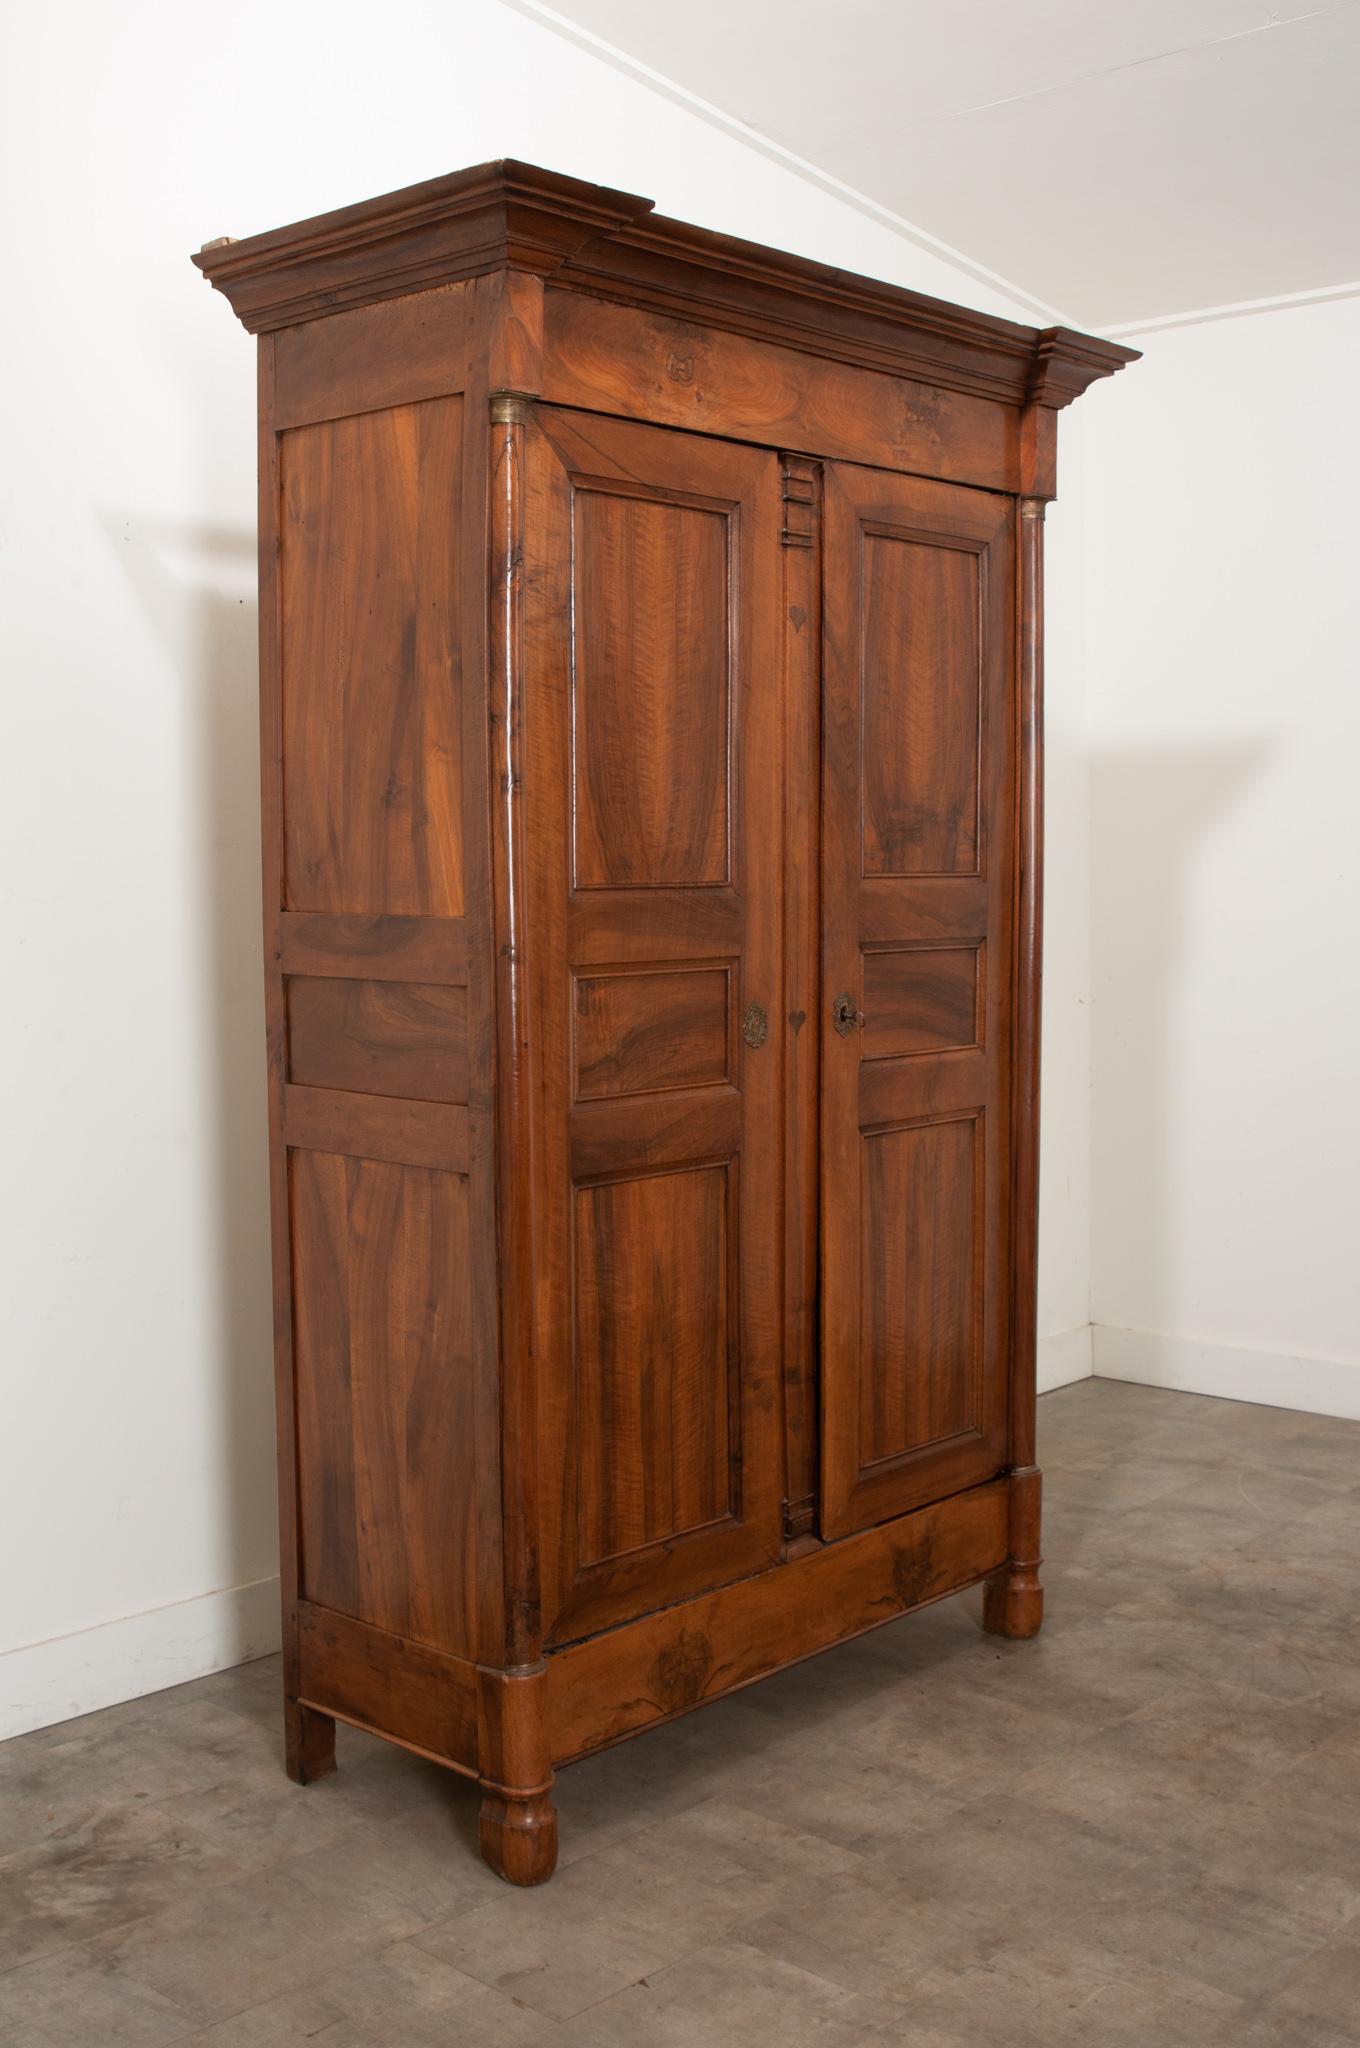 19th Century French Empire Solid Walnut Armoire